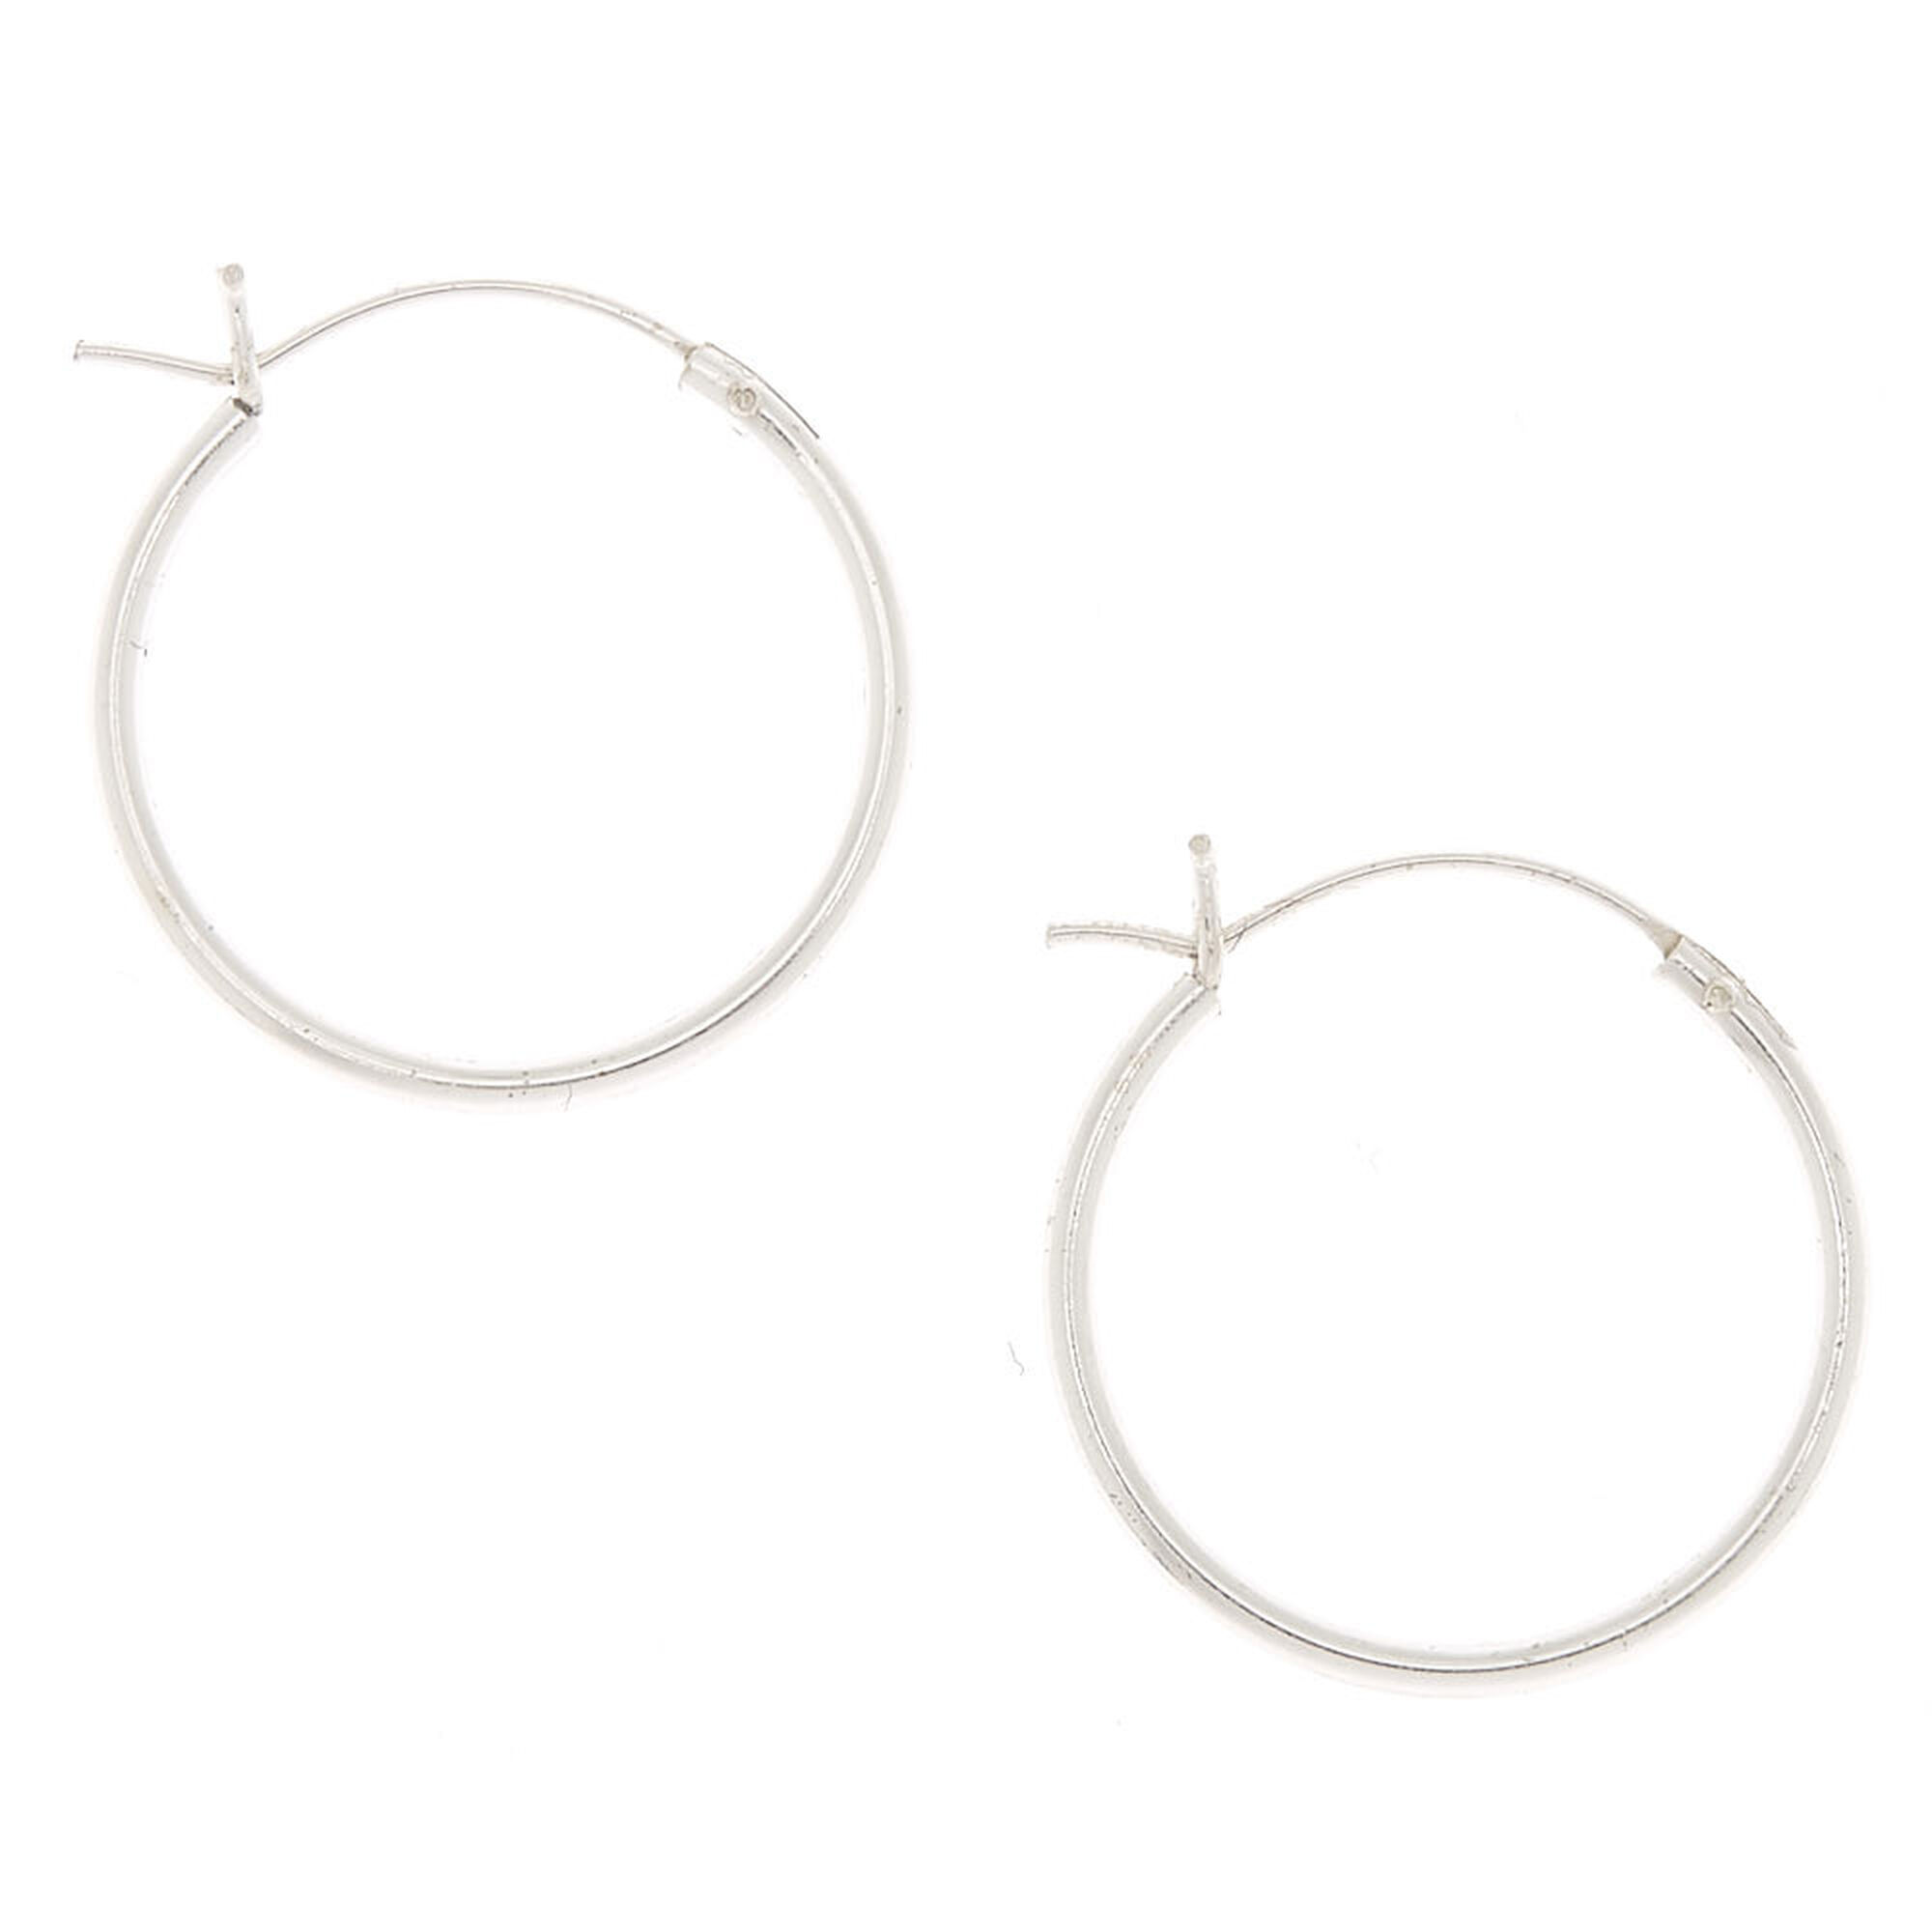 View Claires 18MM Hoop Earrings Silver information